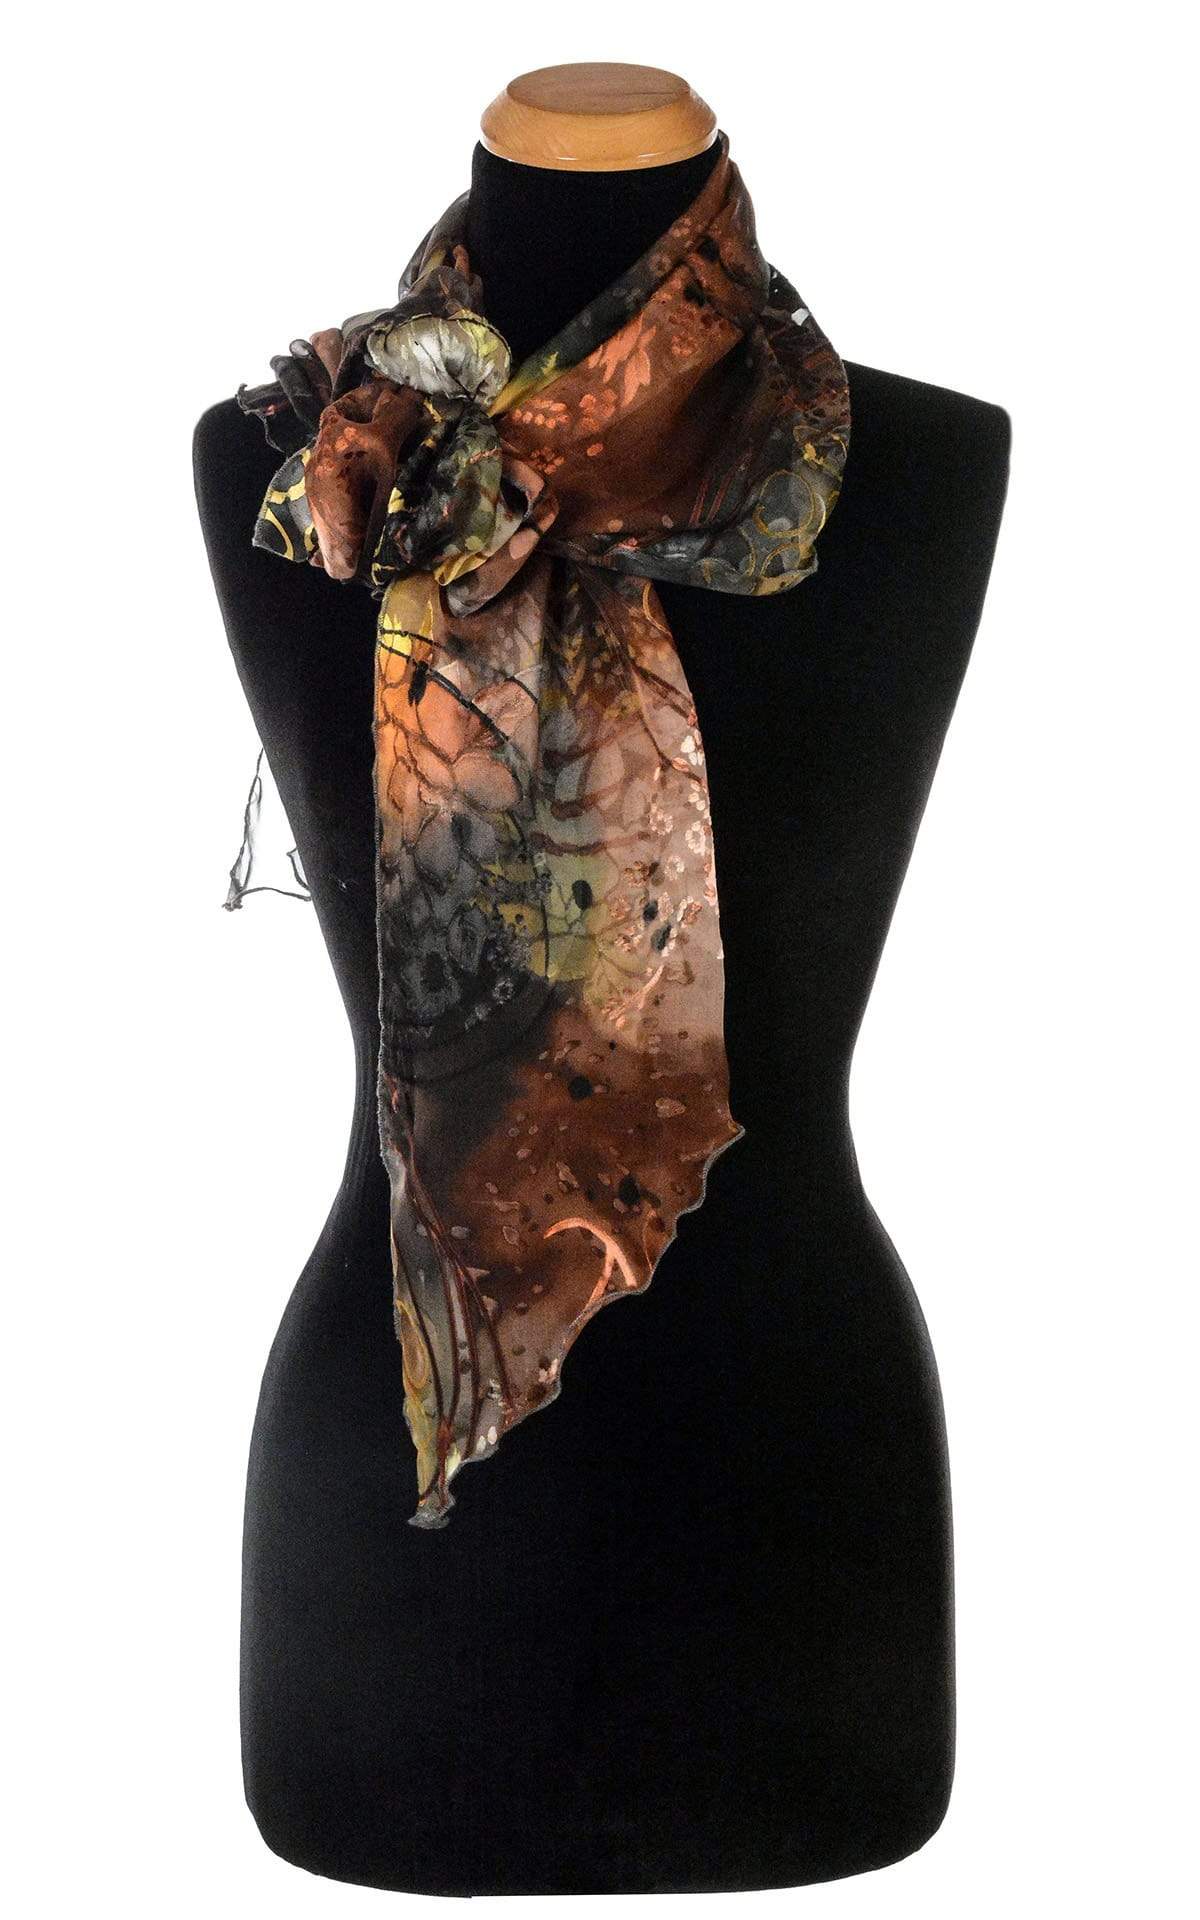 Women’s Large Handkerchief Scarf, Wrap in hand-painted silk on a mannequin shown in a bow | Garden Path in Tiger Lily black, green, rust, yellow, and Gray | Handmade in Seattle WA | Pandemonium Millinery